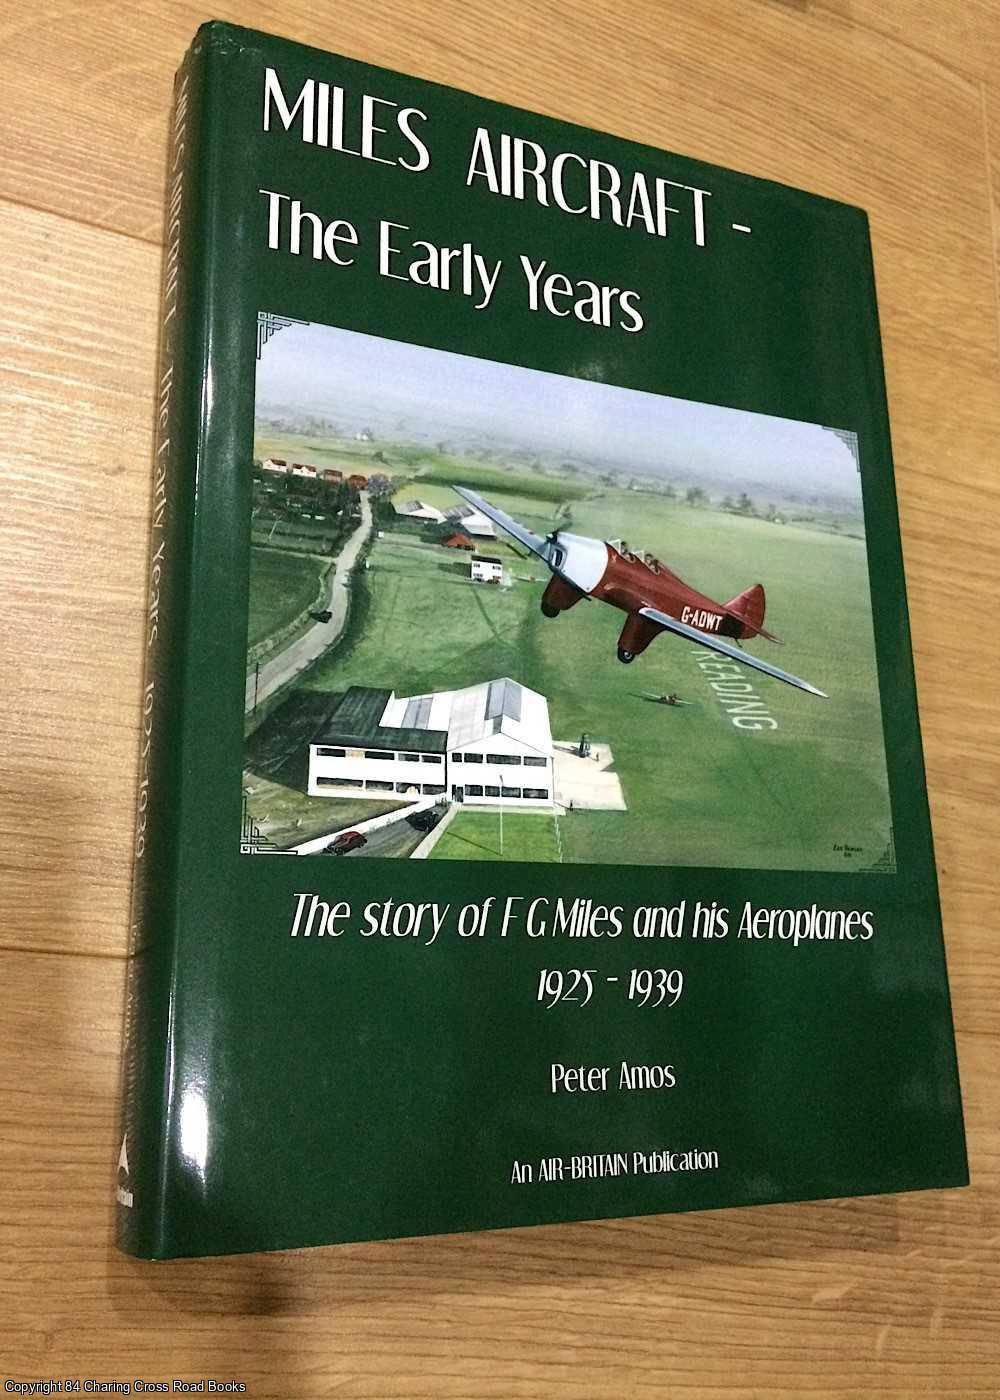 Amos, Peter - Miles Aircraft the Early Years the Story of F G Miles and His Aeroplanes 1925-1939